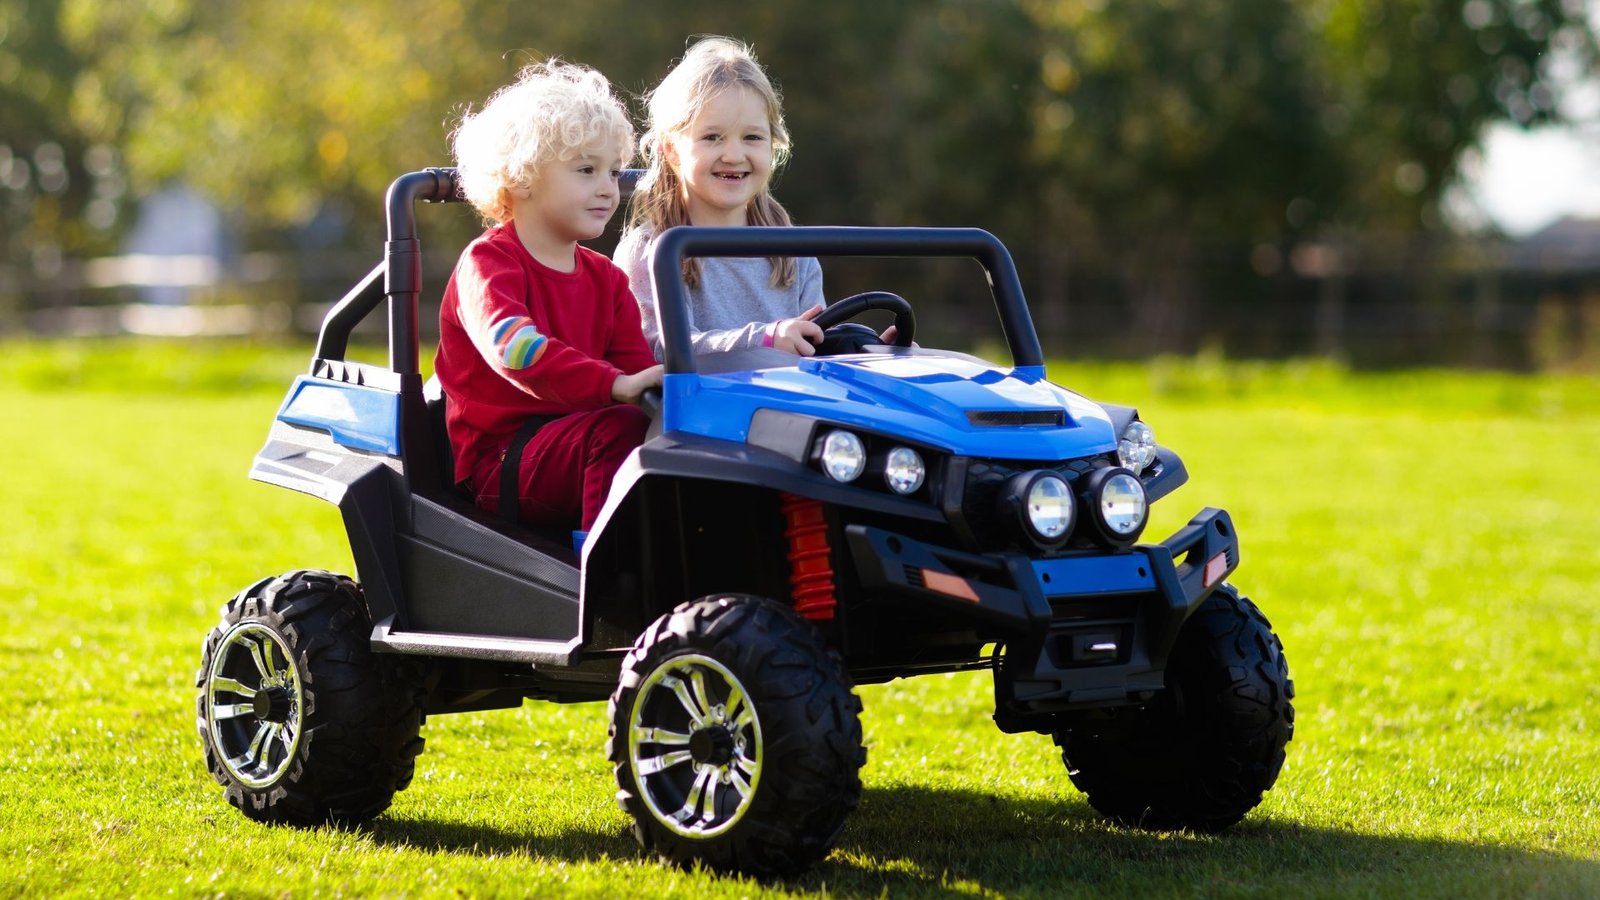 Kids Driving Electric Toy Car